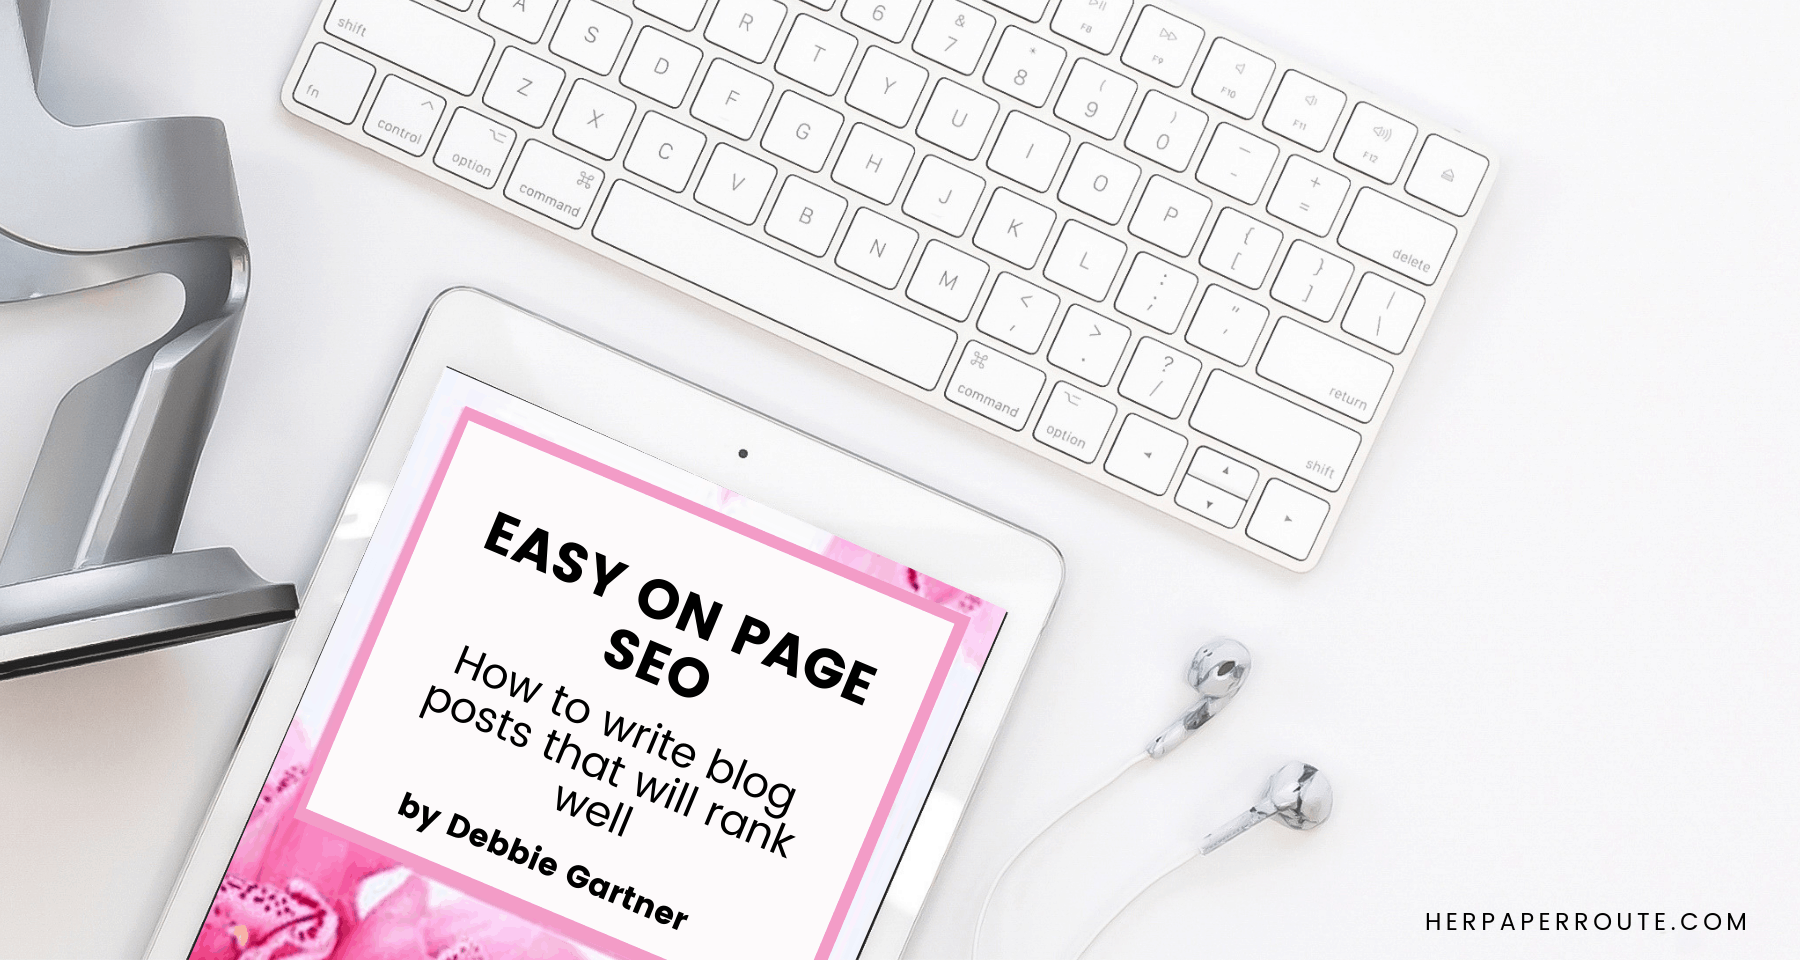 Easy On-Page SEO Tips Book by Debbie Gartner, Review